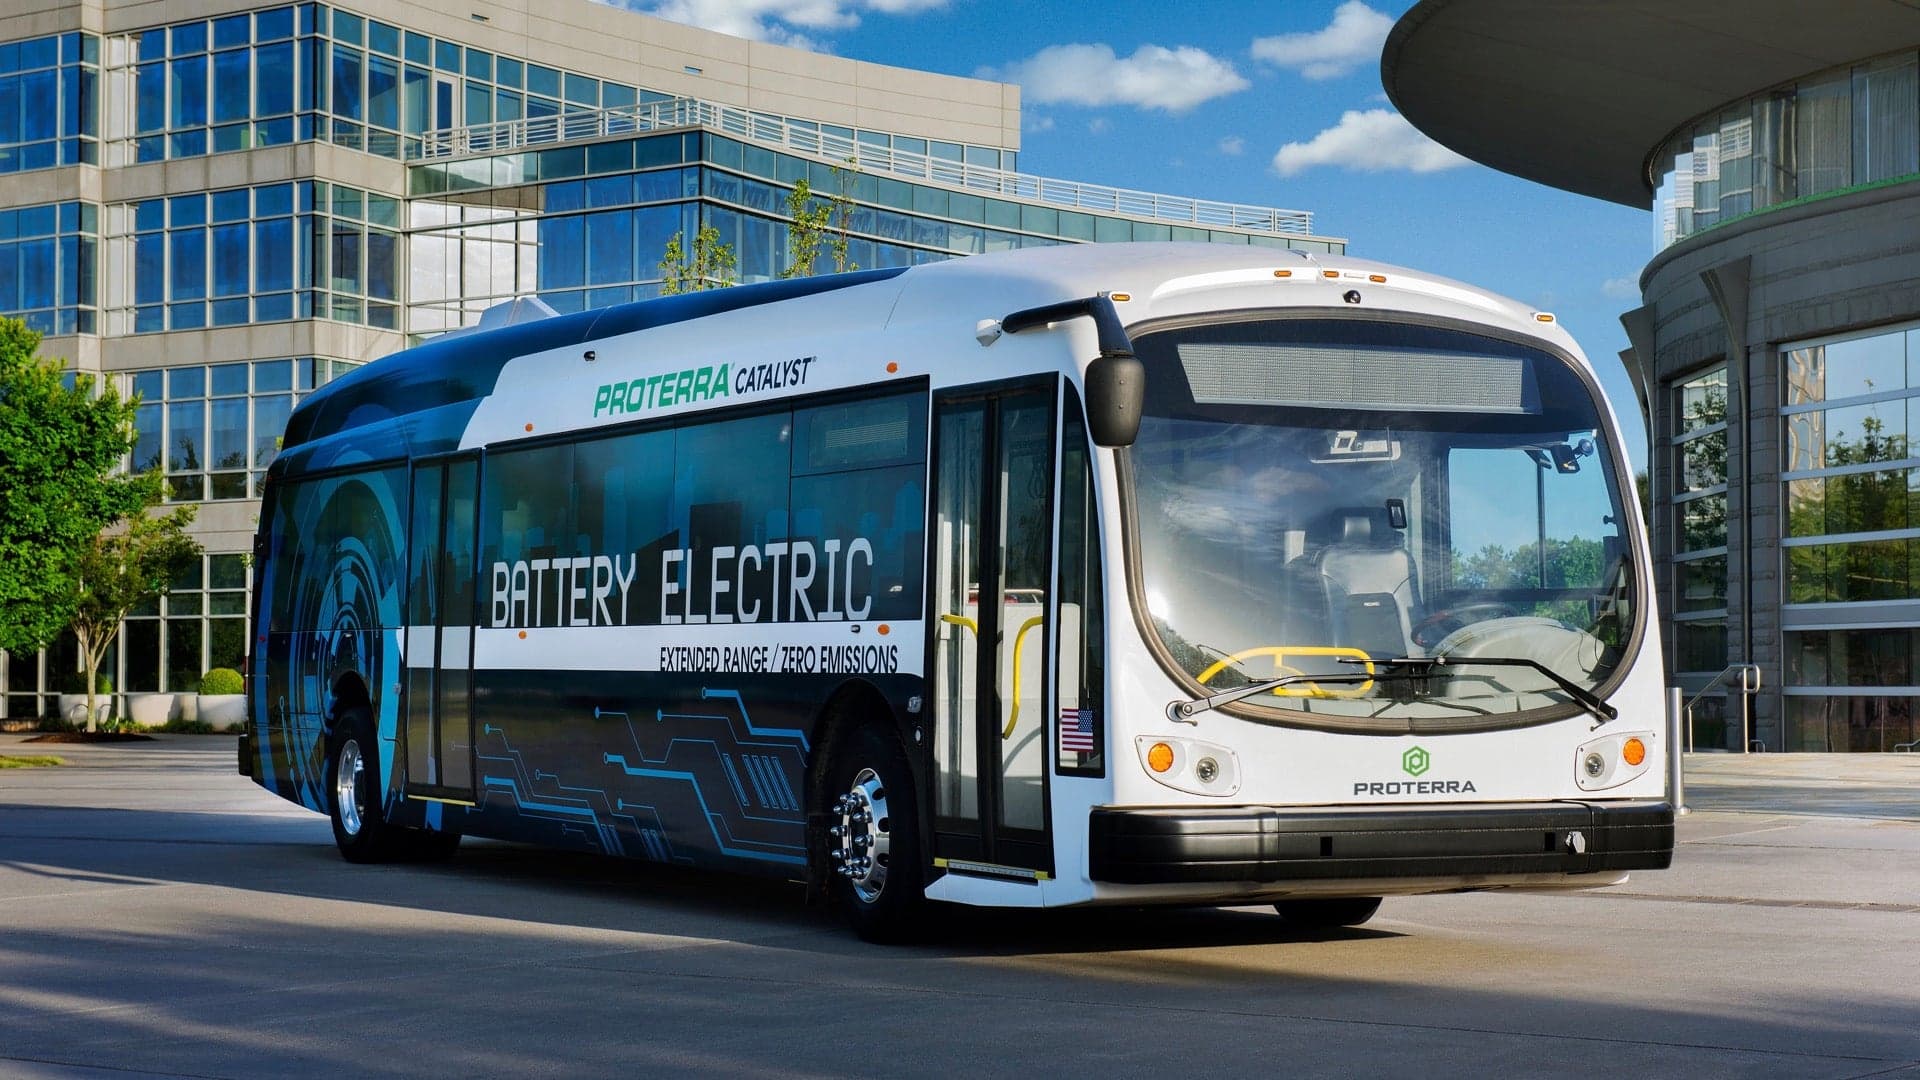 Electric Buses Have Lower Emissions Regardless of Electricity Source, Study Says